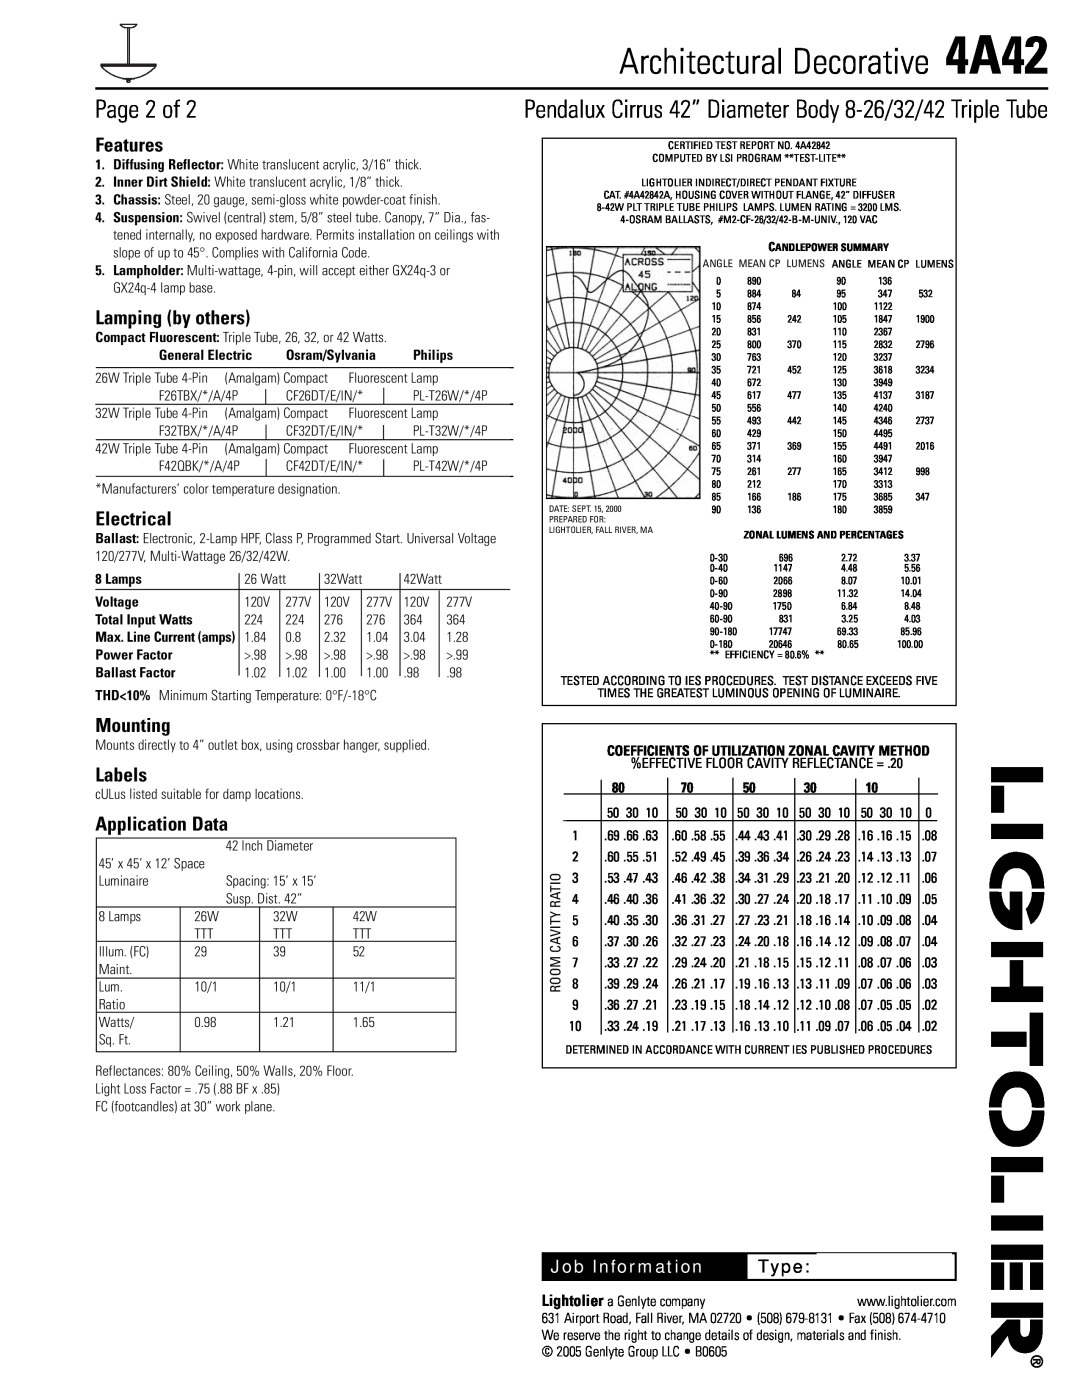 Lightolier 4A42 Page 2 of, Features, Lamping by others, Electrical, Mounting, Labels, Application Data, Job Information 